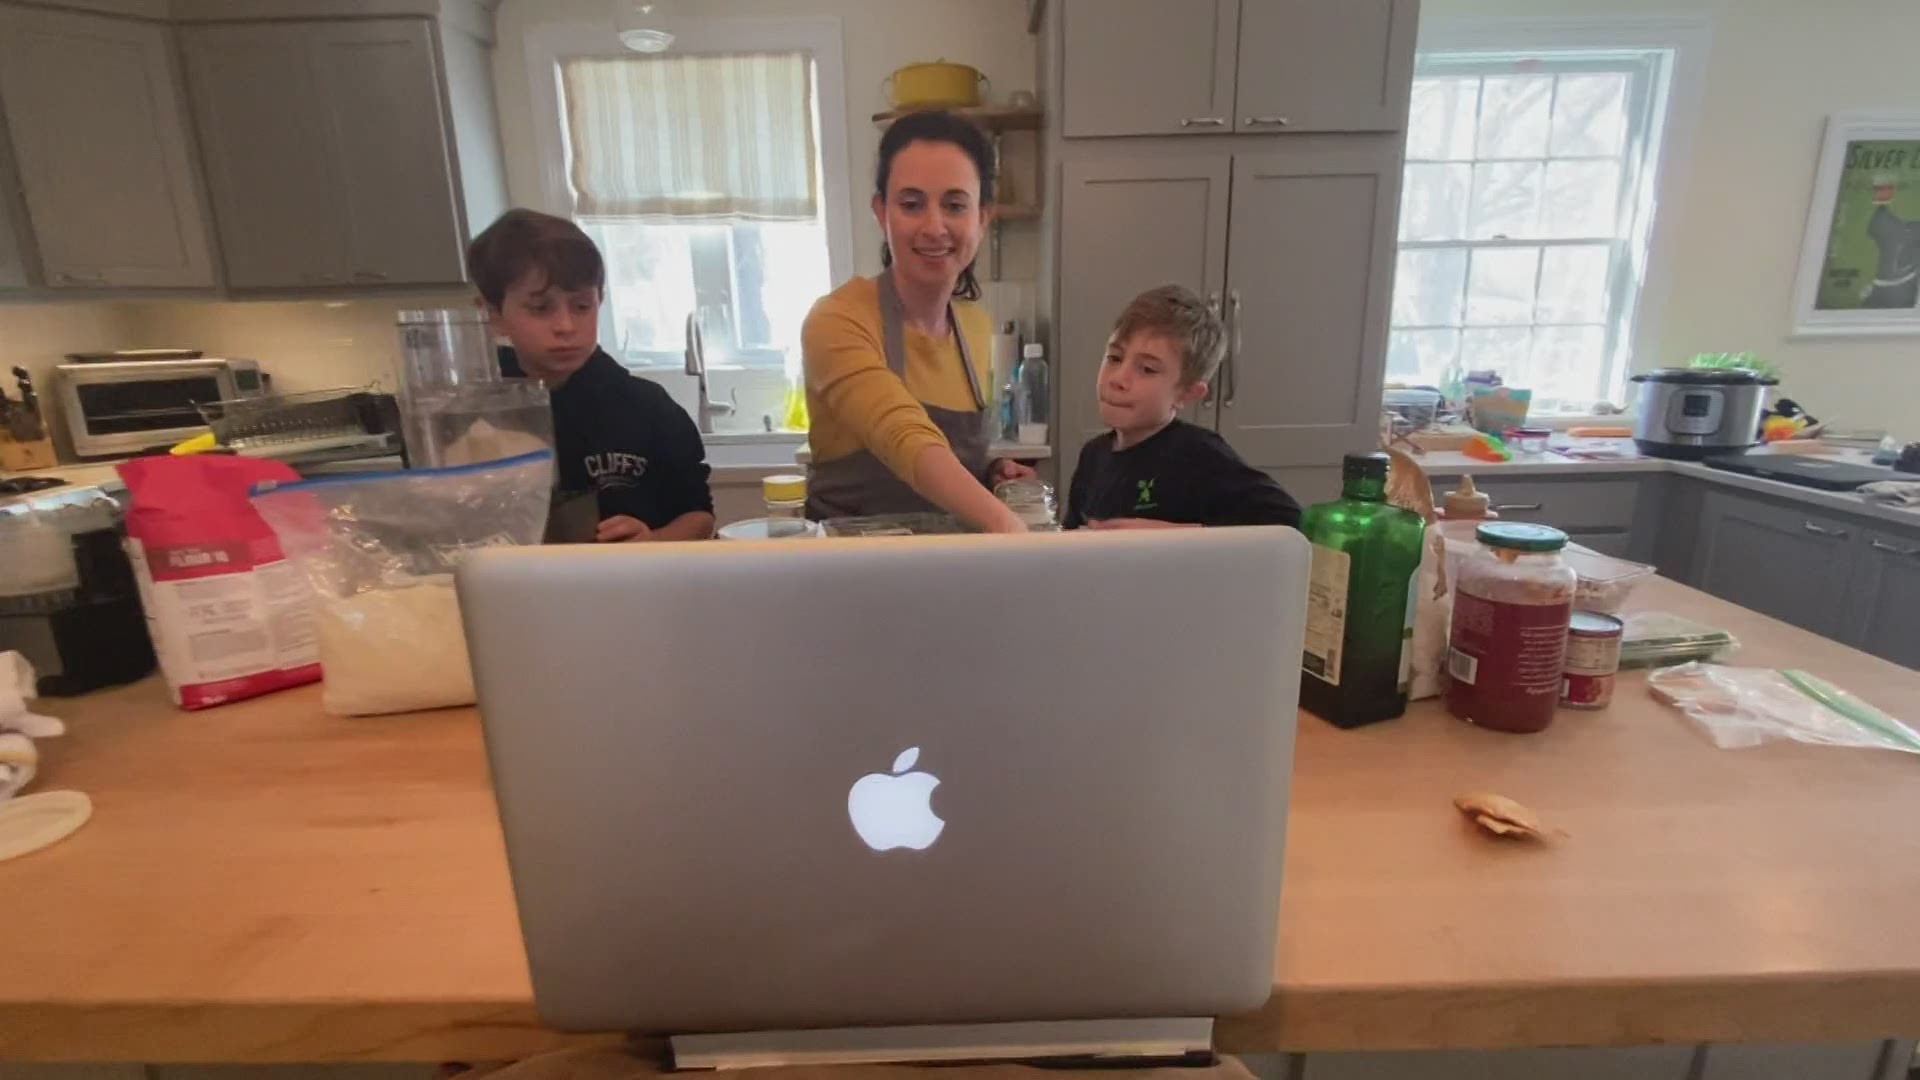 Amy Kayne and her two sons are hosting a kid-friendly cooking show on Facebook from their Portland home attracted viewers from the world.